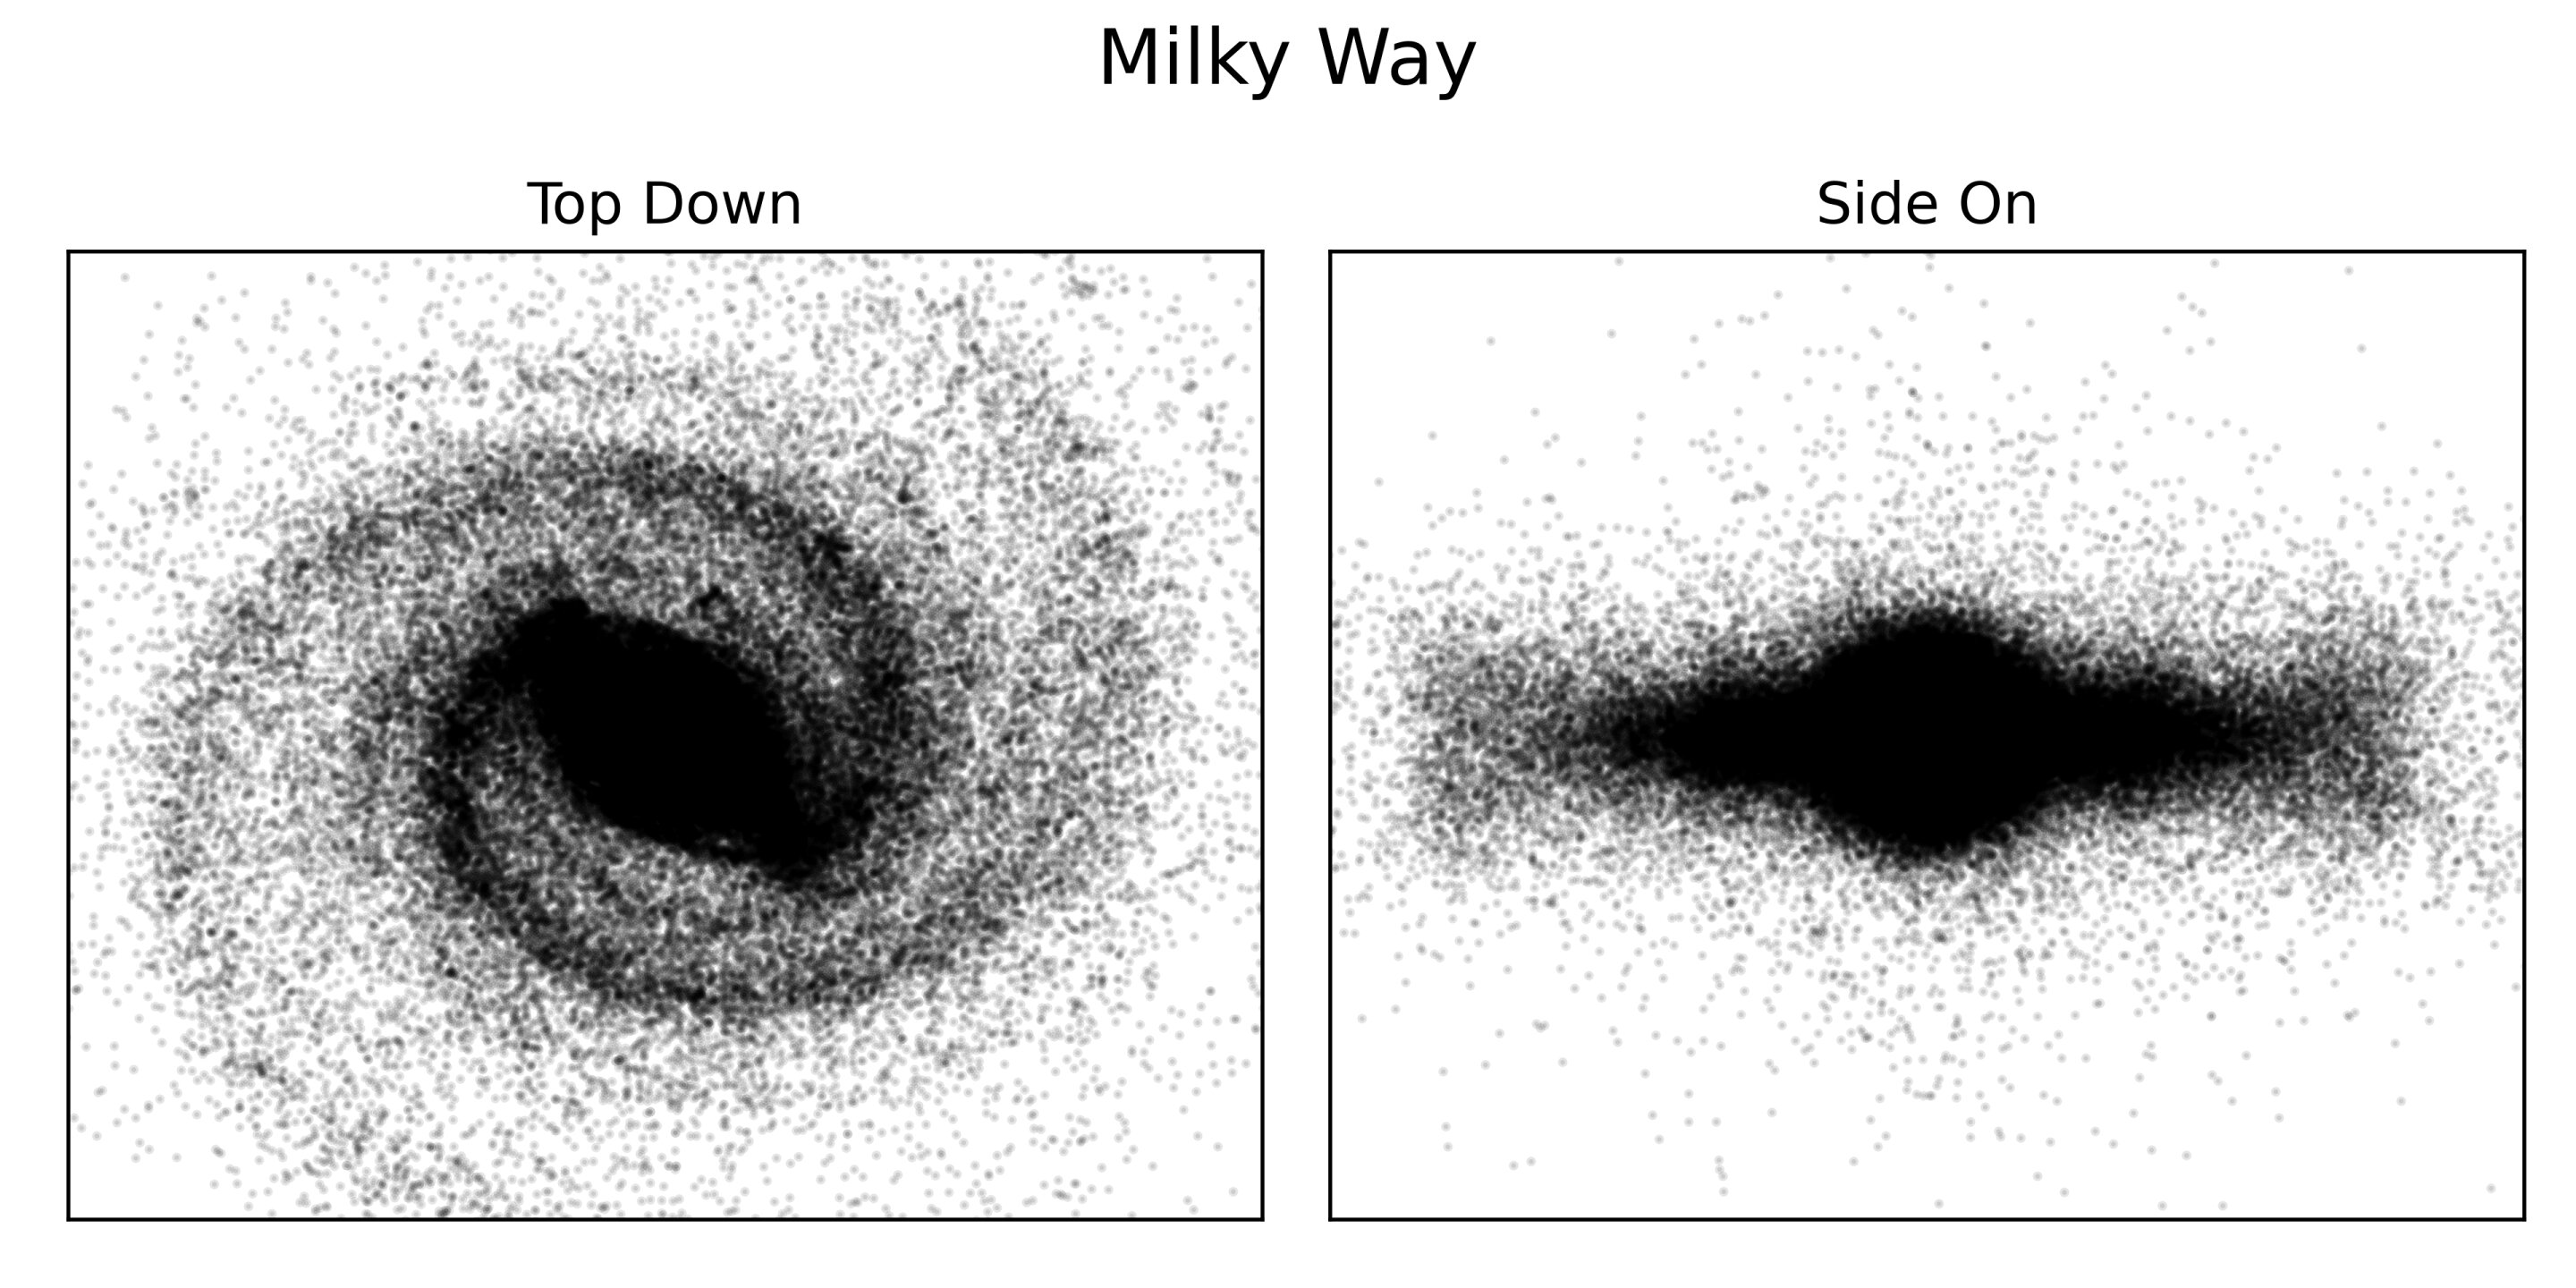 A map showing the distribution of stars in the visible Milky Way. The galaxy's spiral arms are clearly visible in the top-down image.